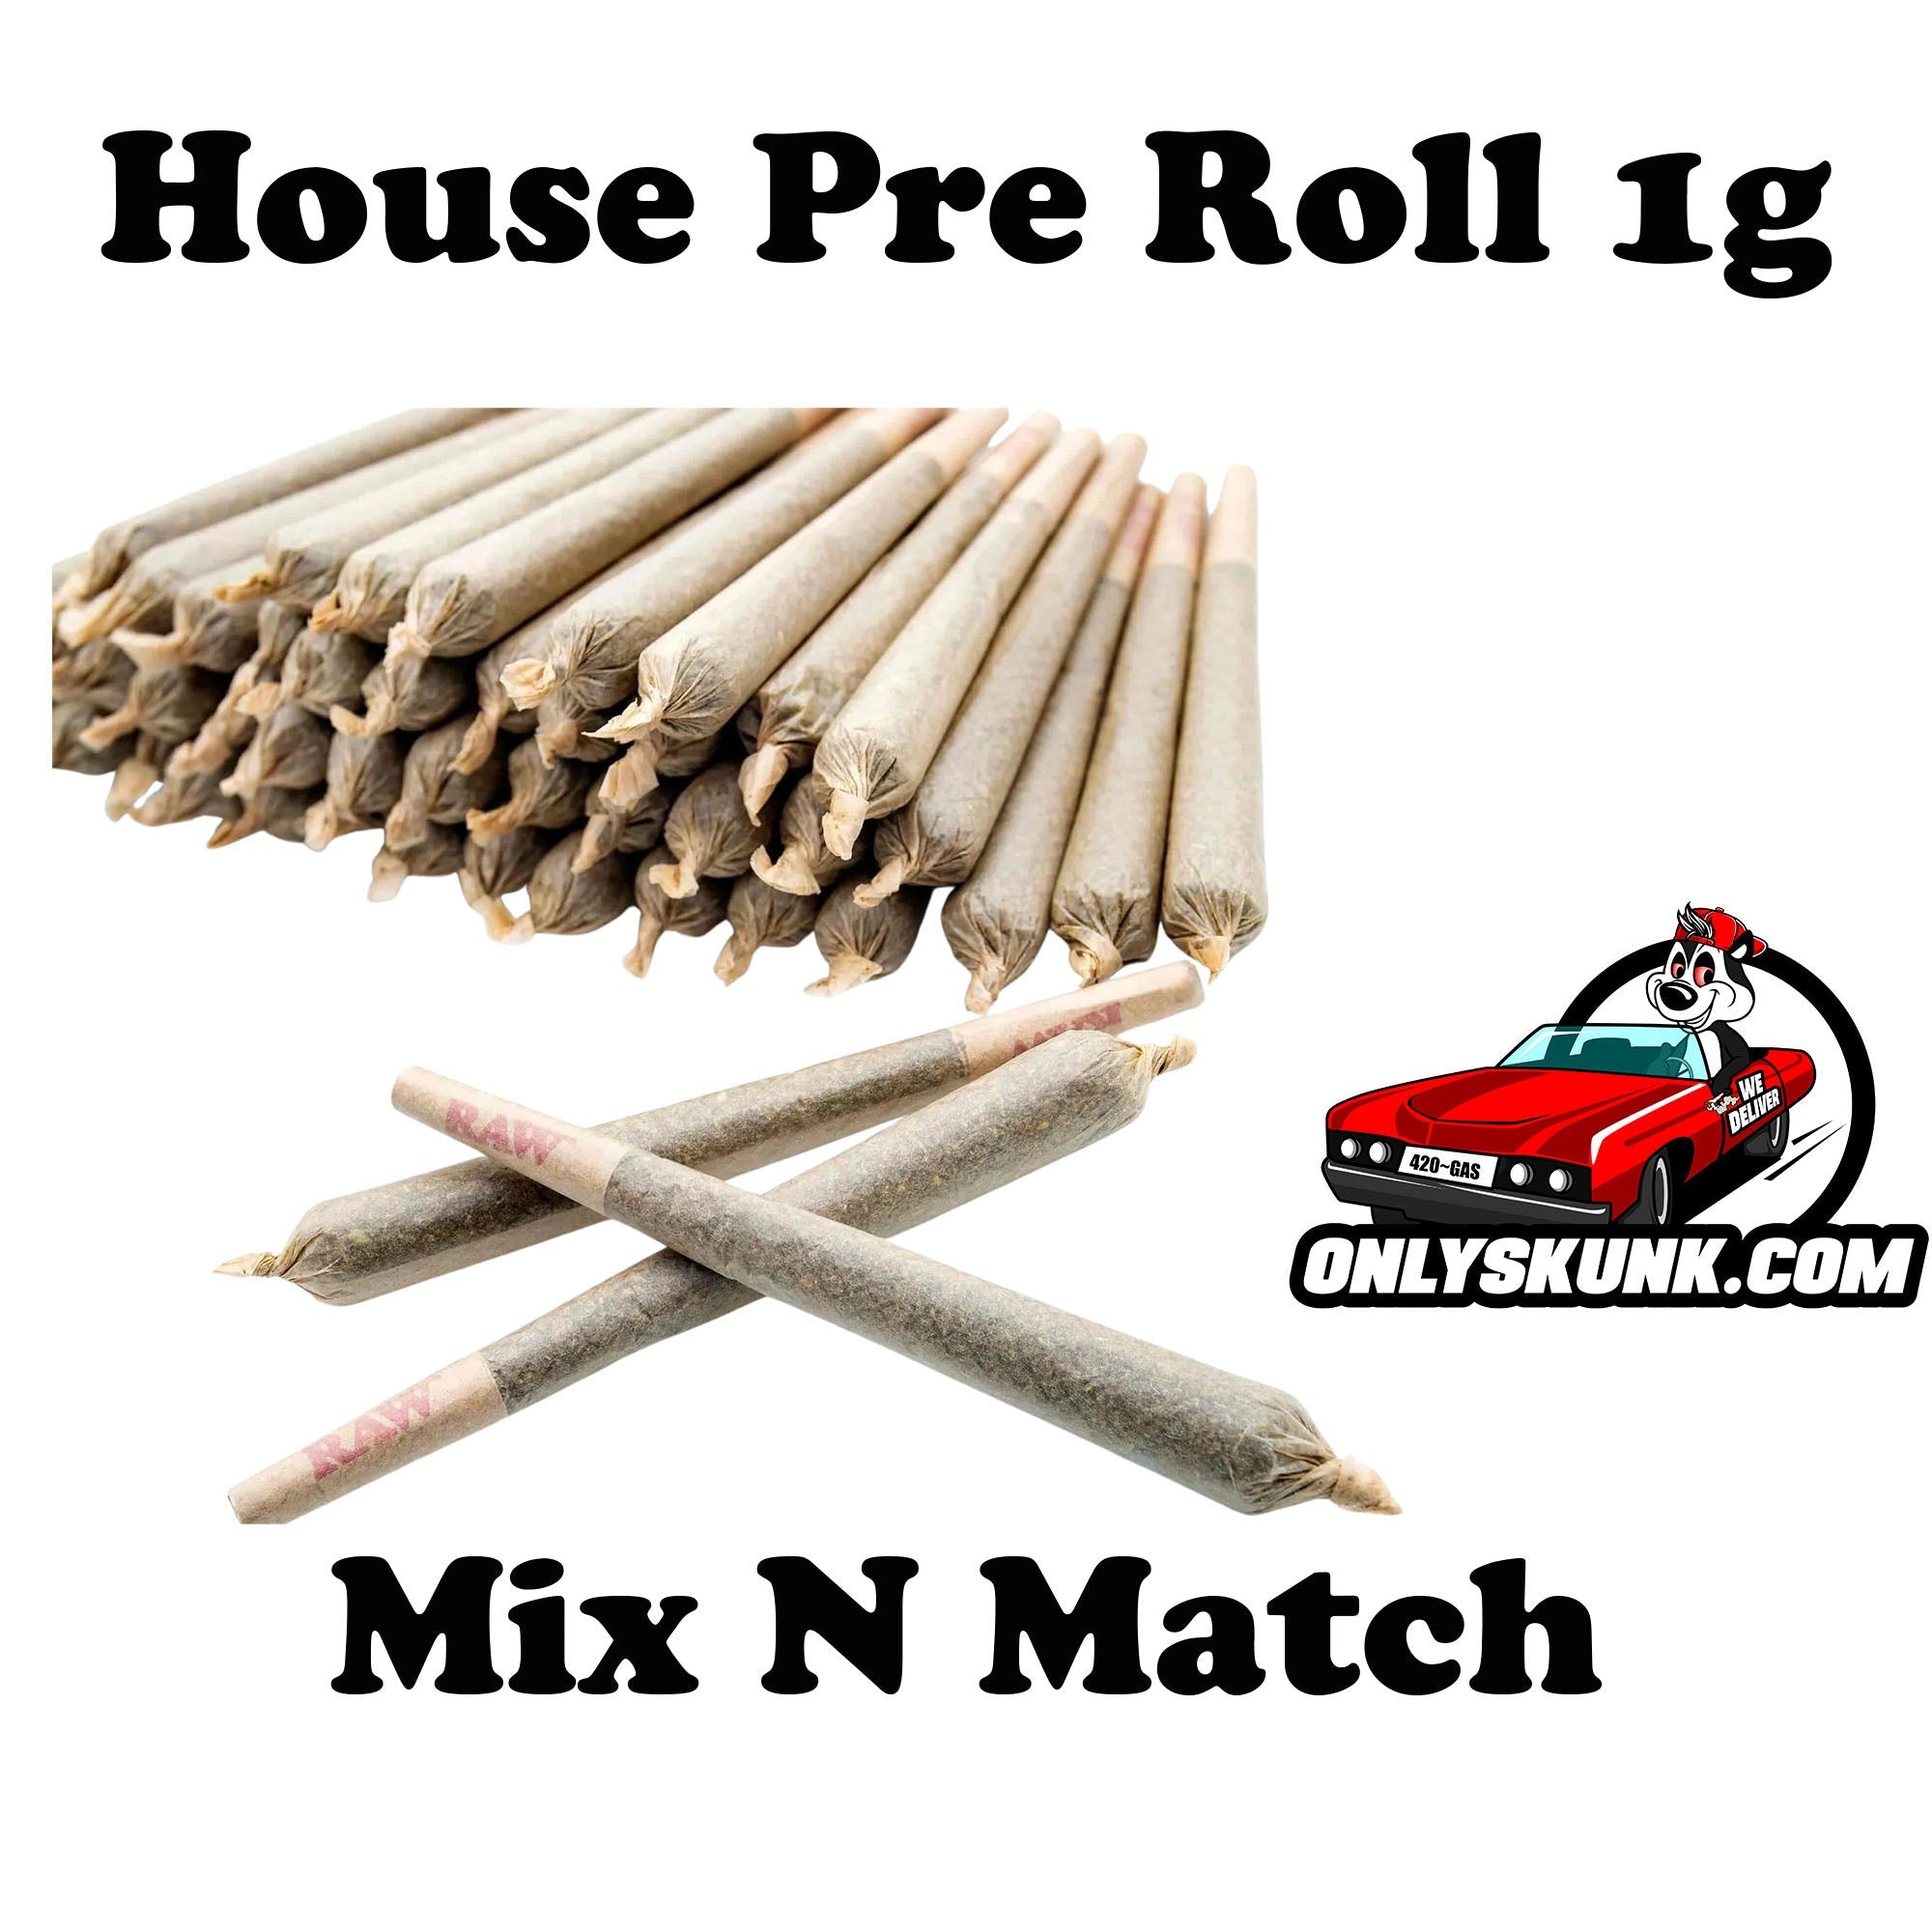 House Pre Roll Strain Specific Mix N Match